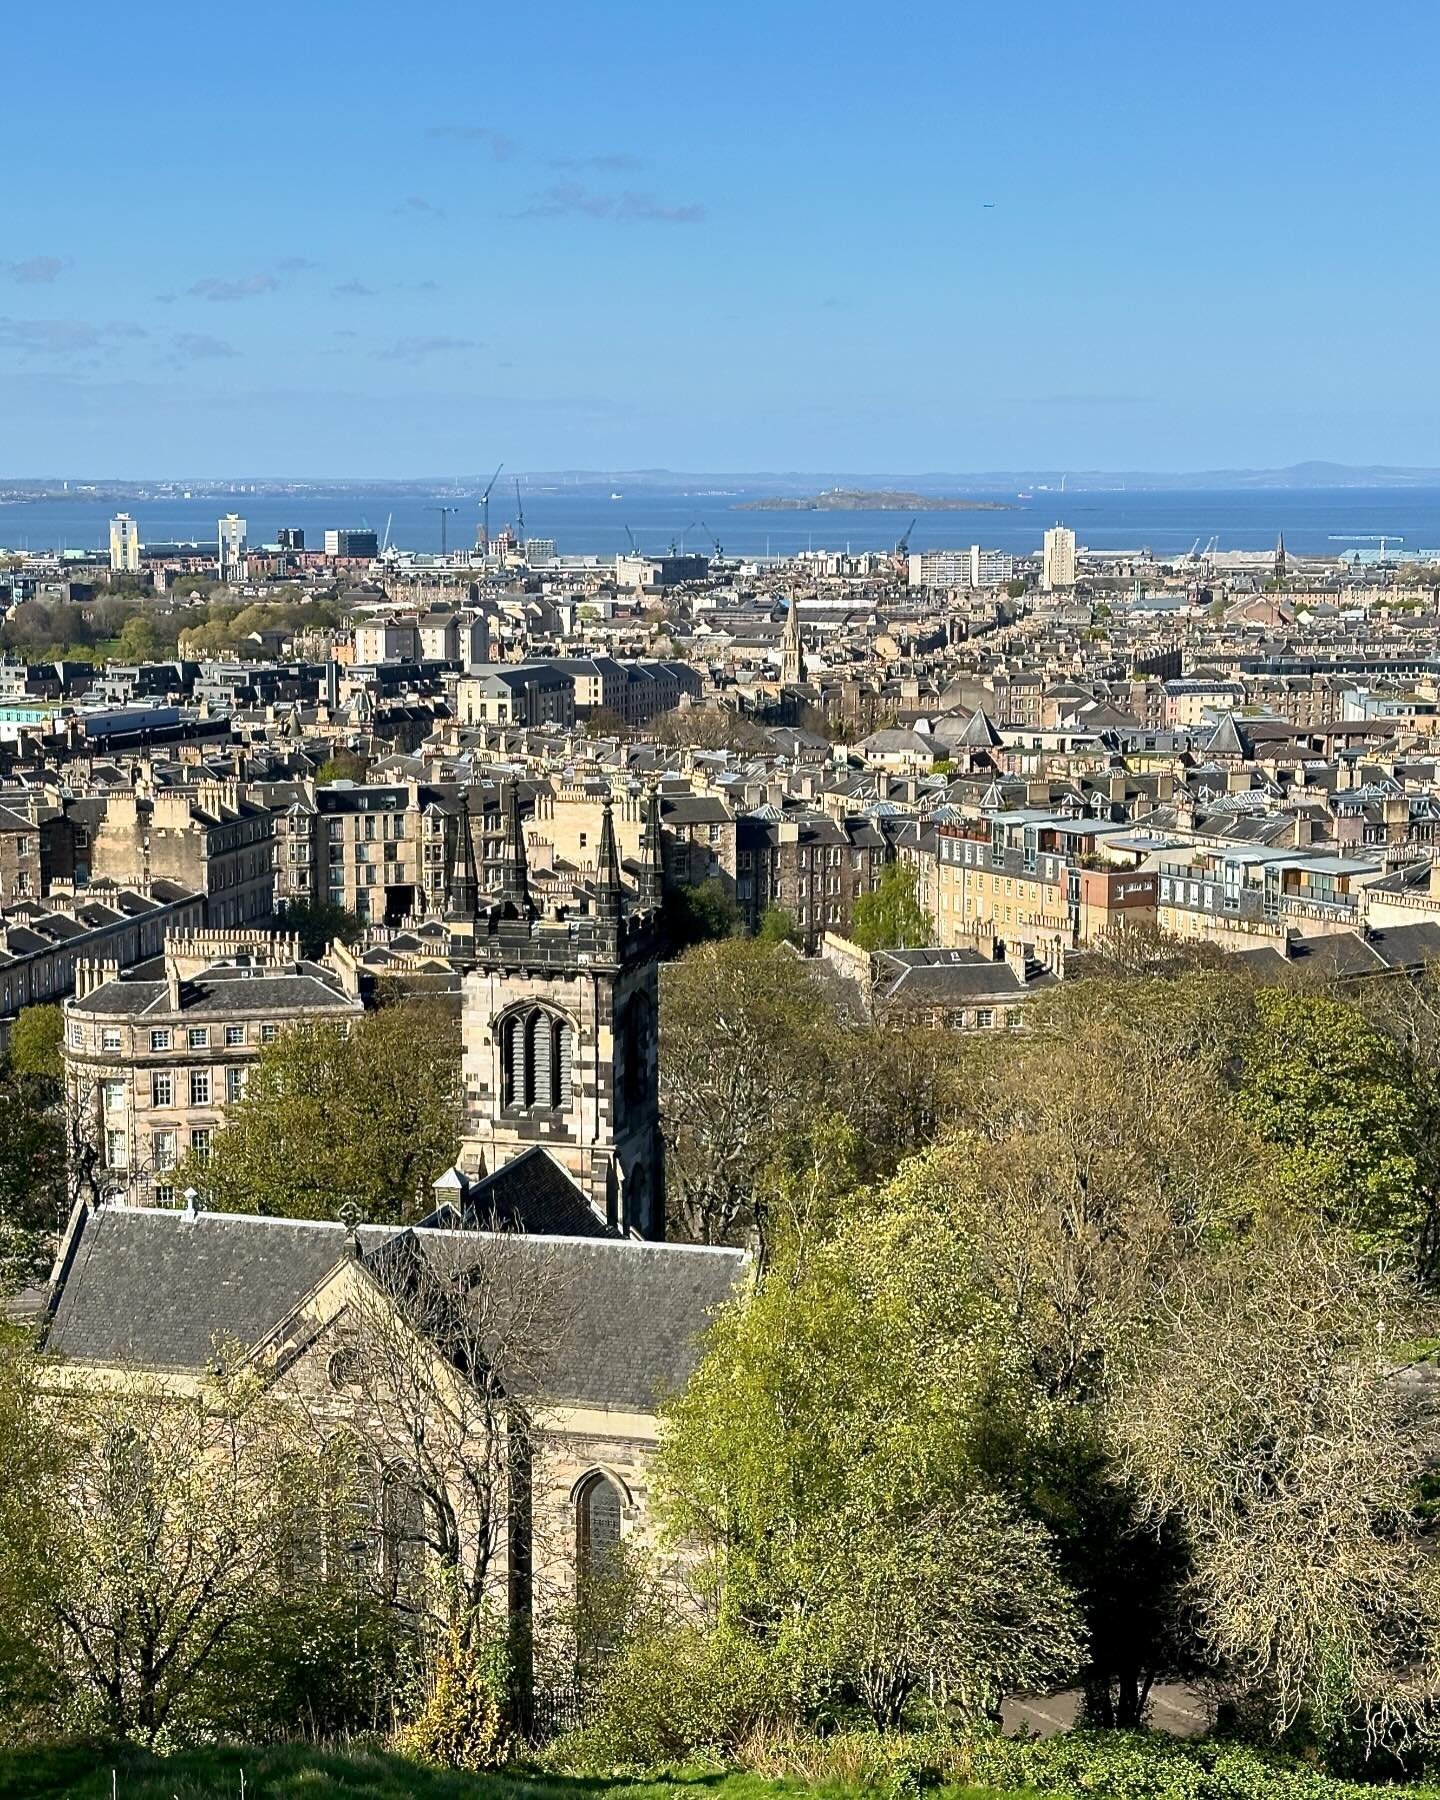 Tuesday Travel Tips inspiration from of Edinburgh, Scotland, which is not considered to be off the beaten path, yet clear blue sky days shouldn&rsquo;t be taken for granted and must be taken advantage of.
*
*
*
#visitedinburgh
#onthegowithheidi
#unco